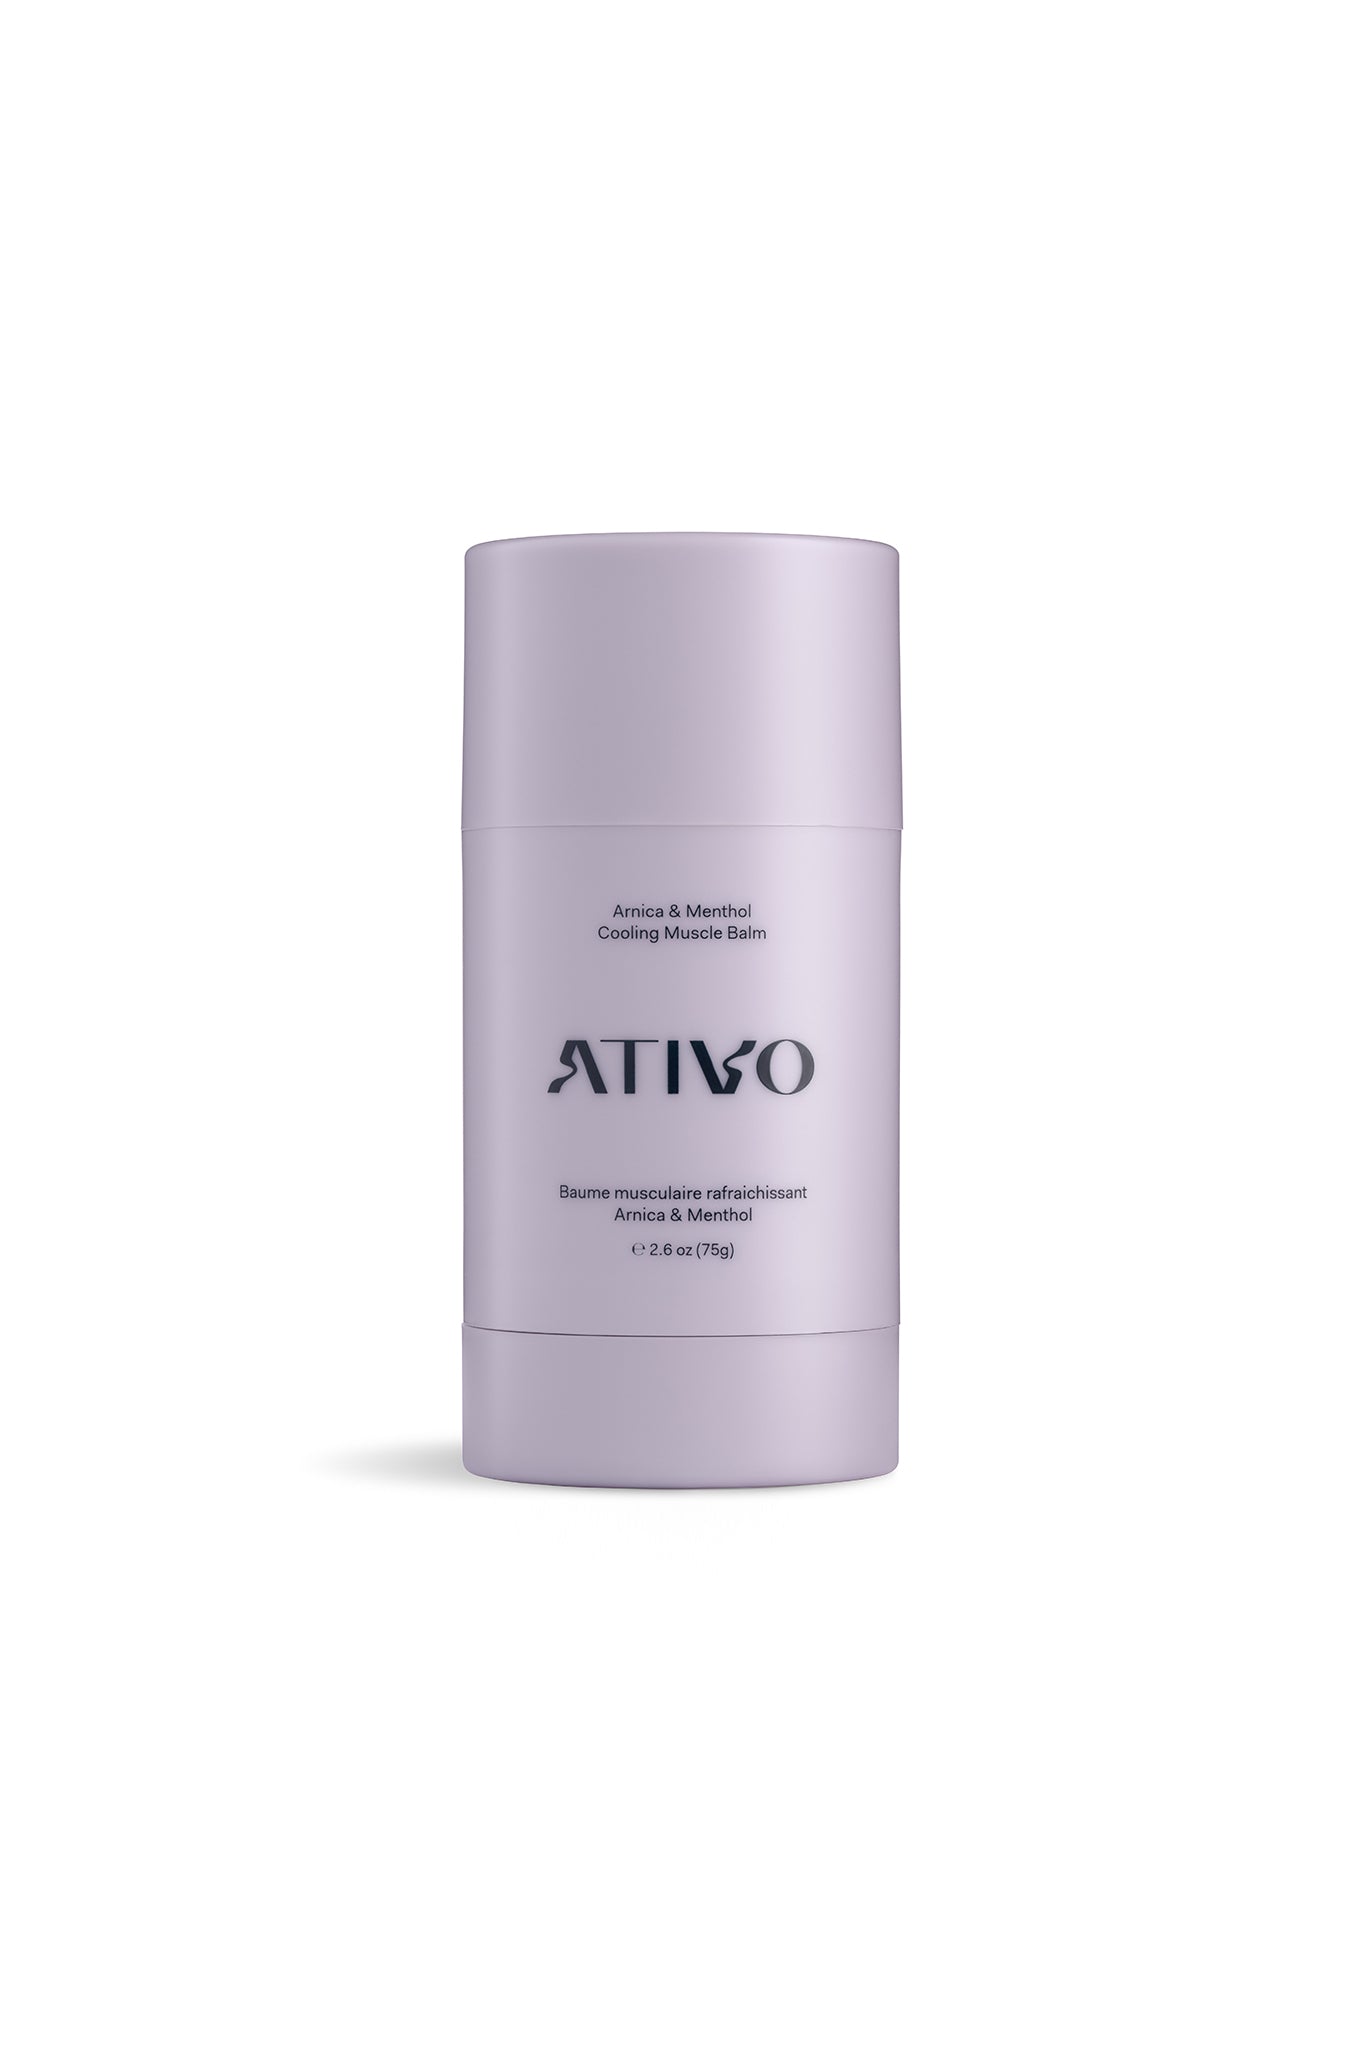 Ativo-Cooling-Muscle-Balm